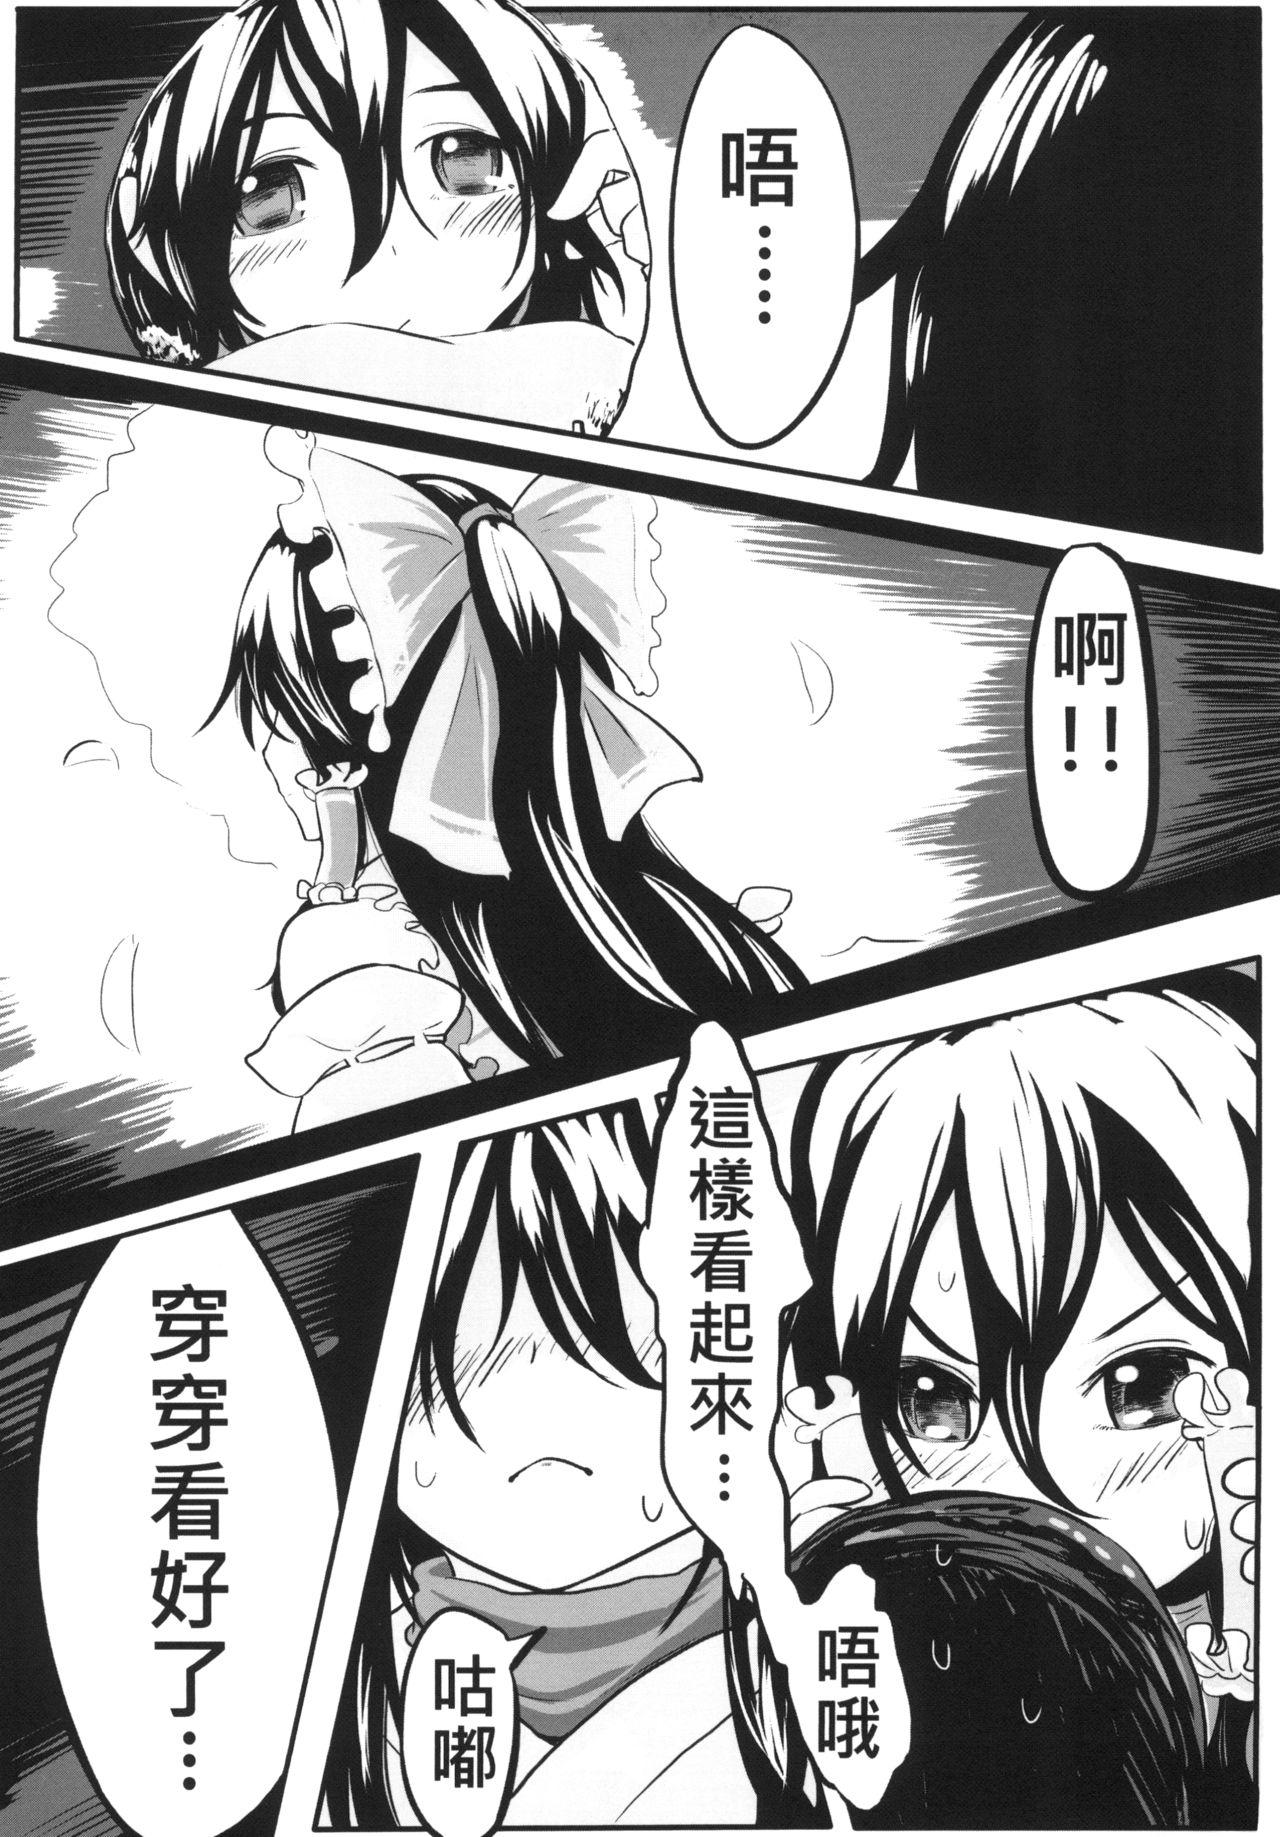 Gapes Gaping Asshole 幻想郷の男の娘-博麗霊夢篇 - Touhou project Youth Porn - Page 9